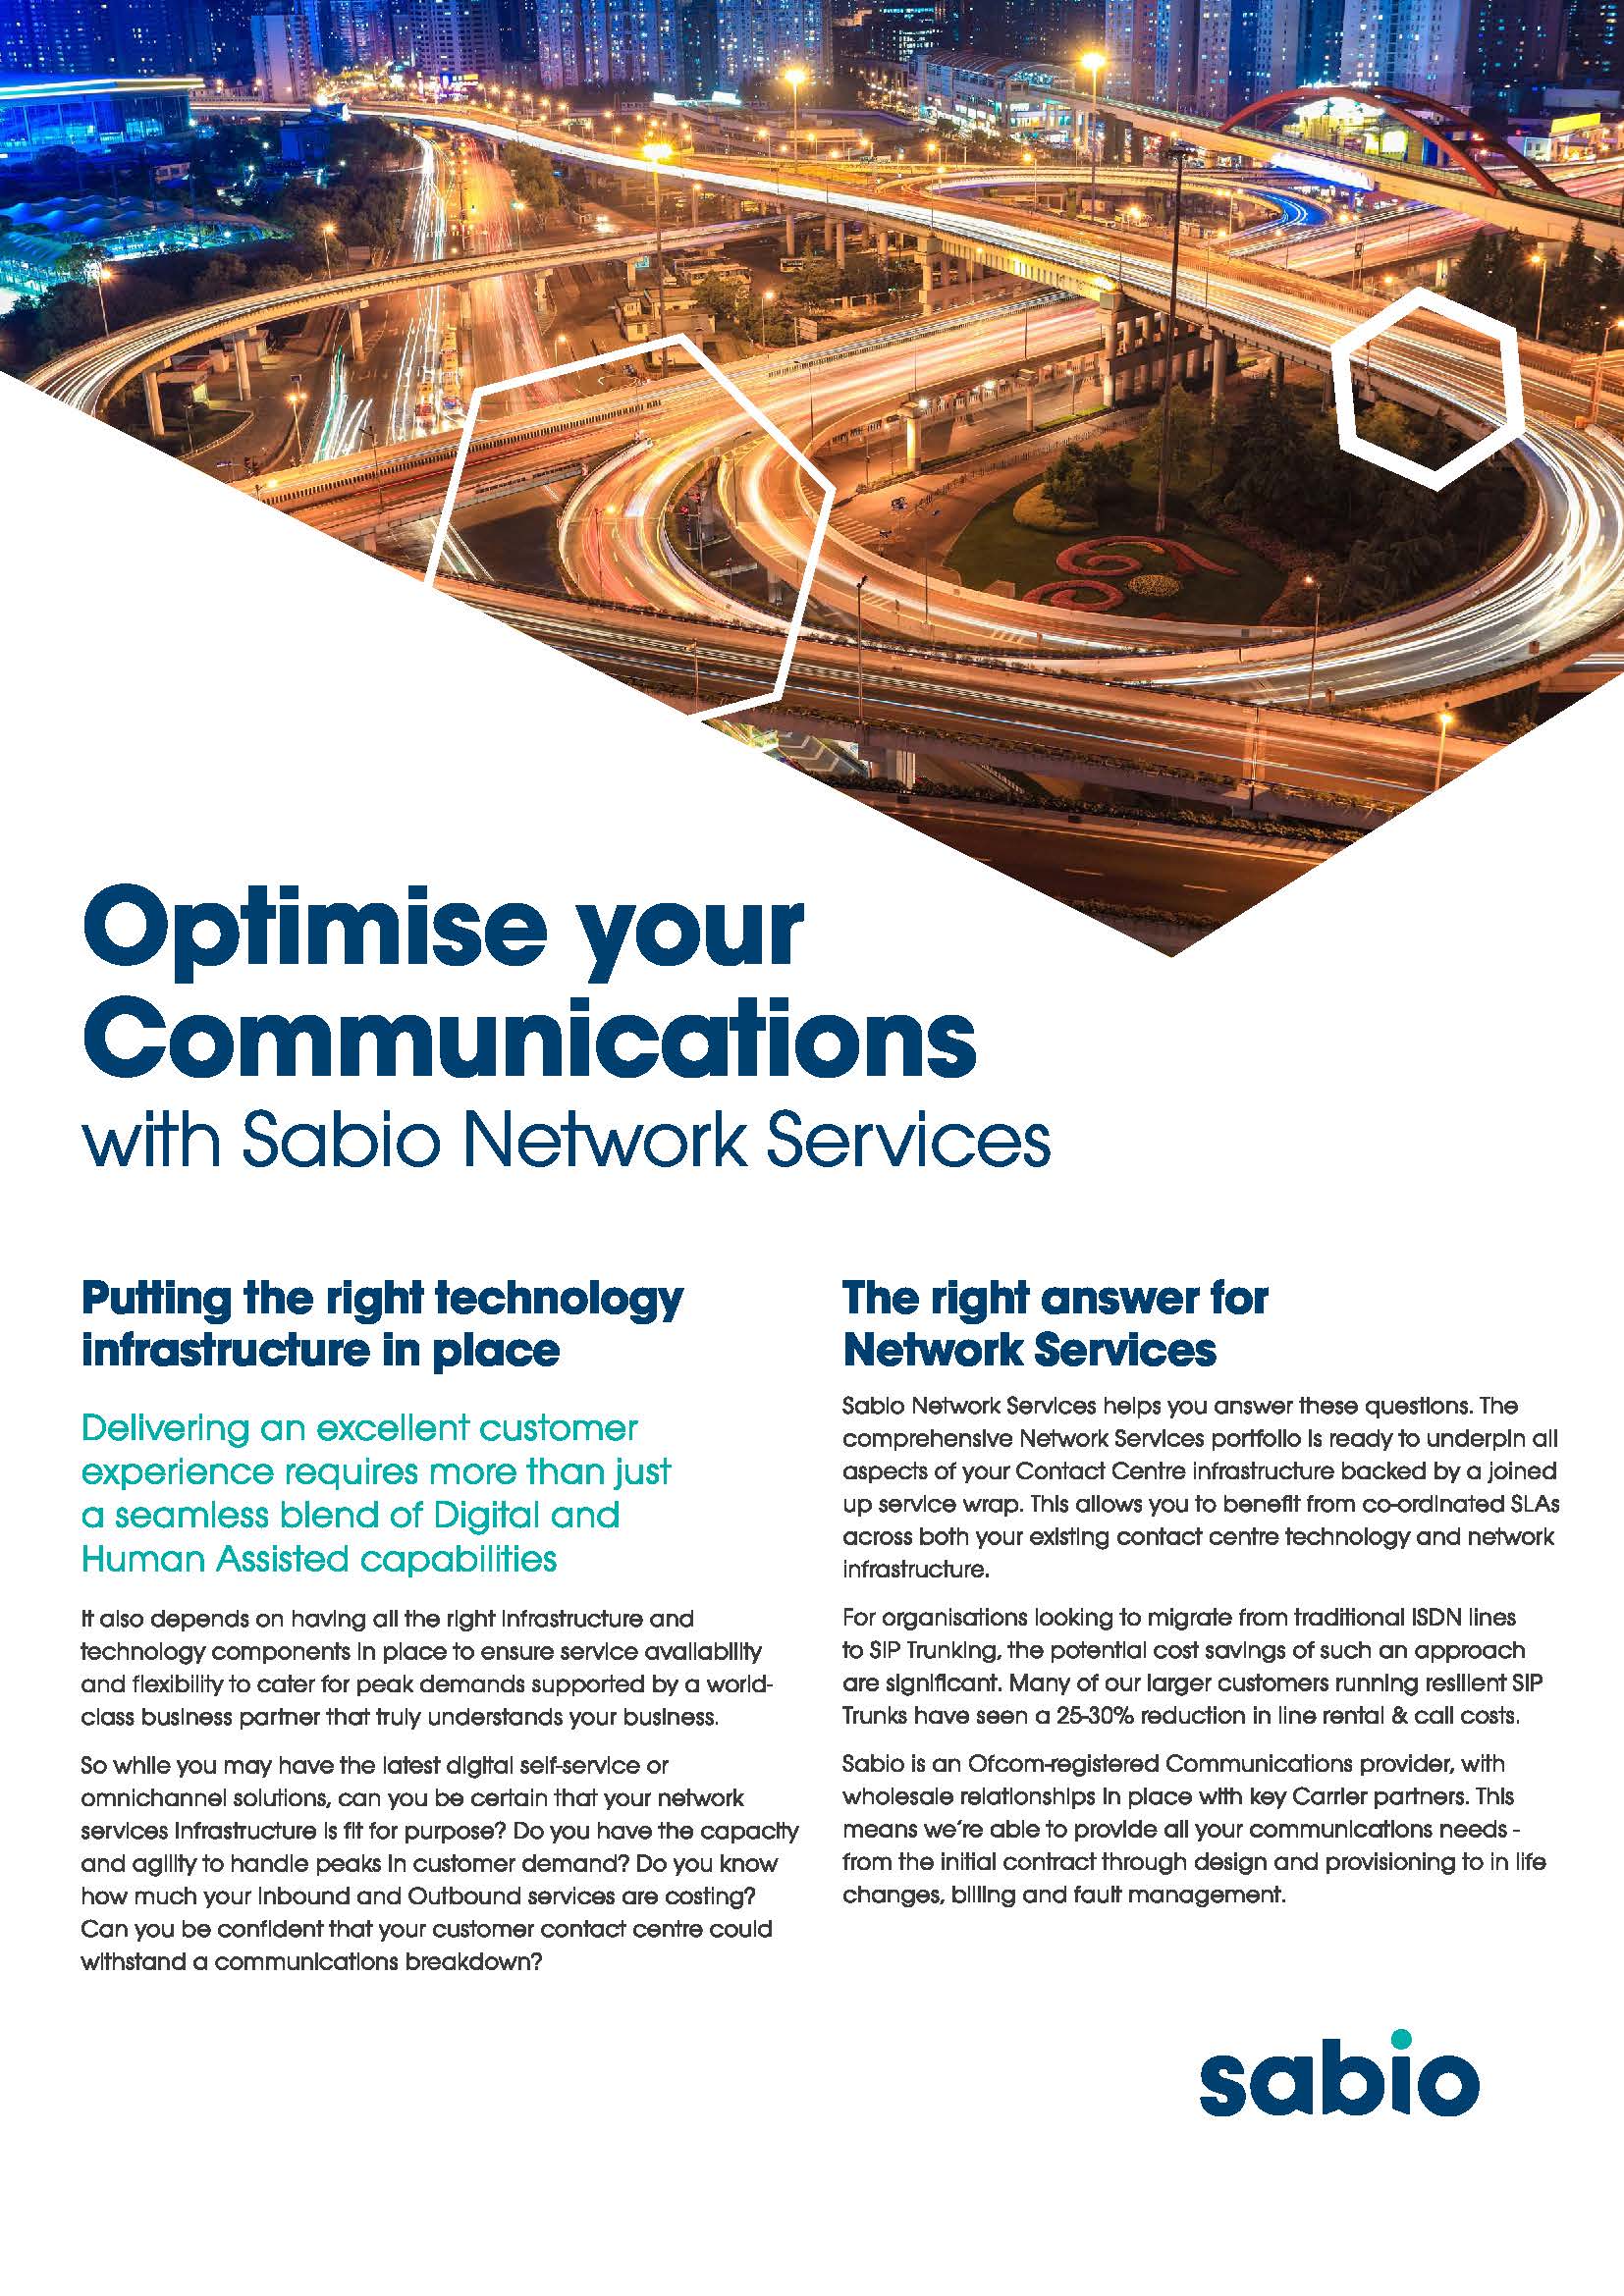 Optimise your communications with Sabio Network Services